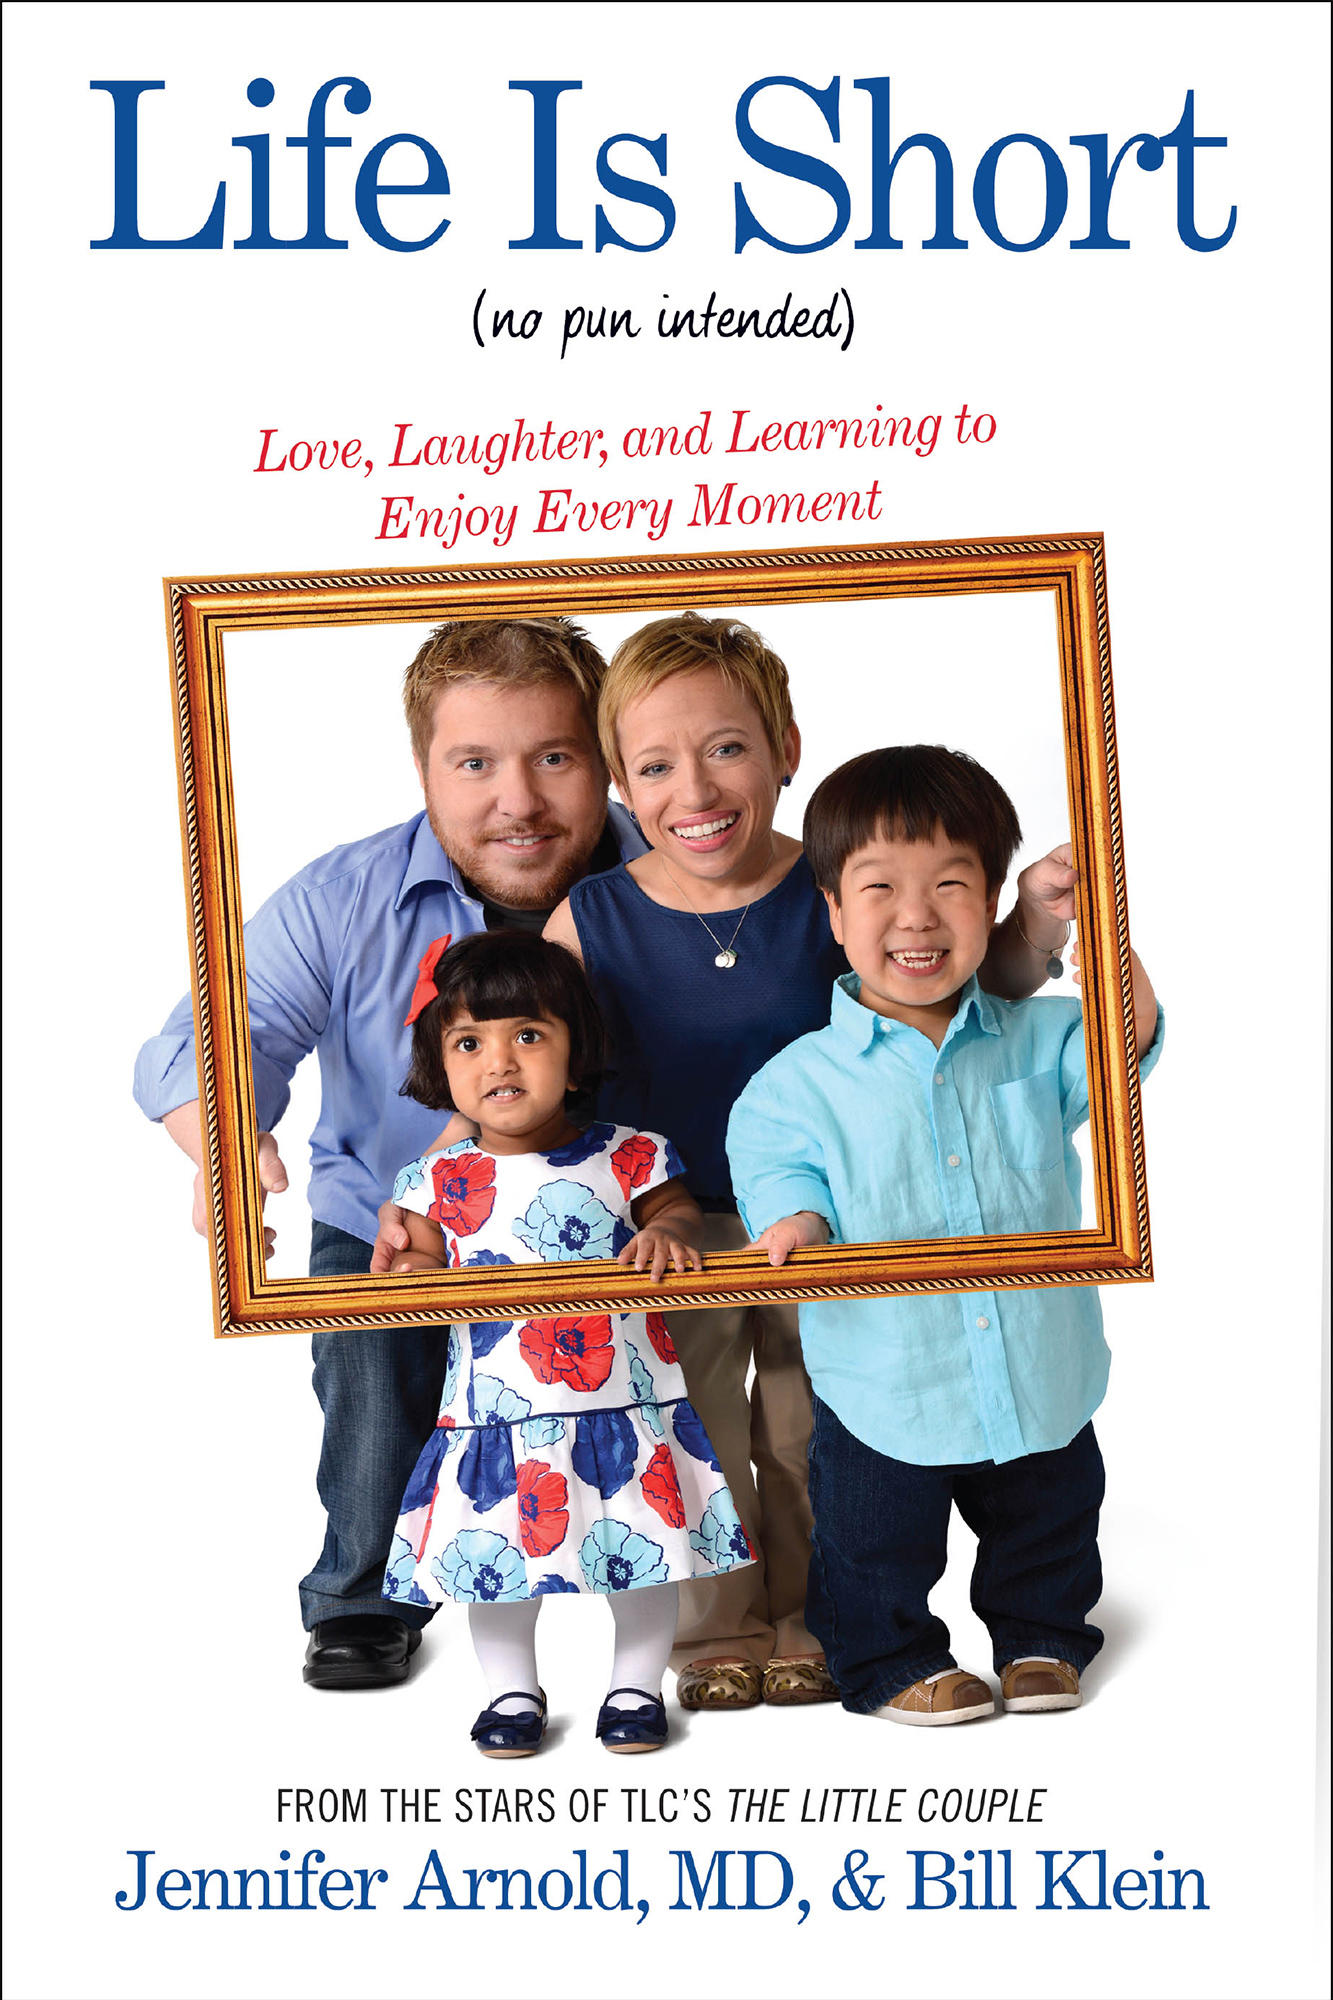 Read an Excerpt by Bill from the Little Couple's New Book | Little ...